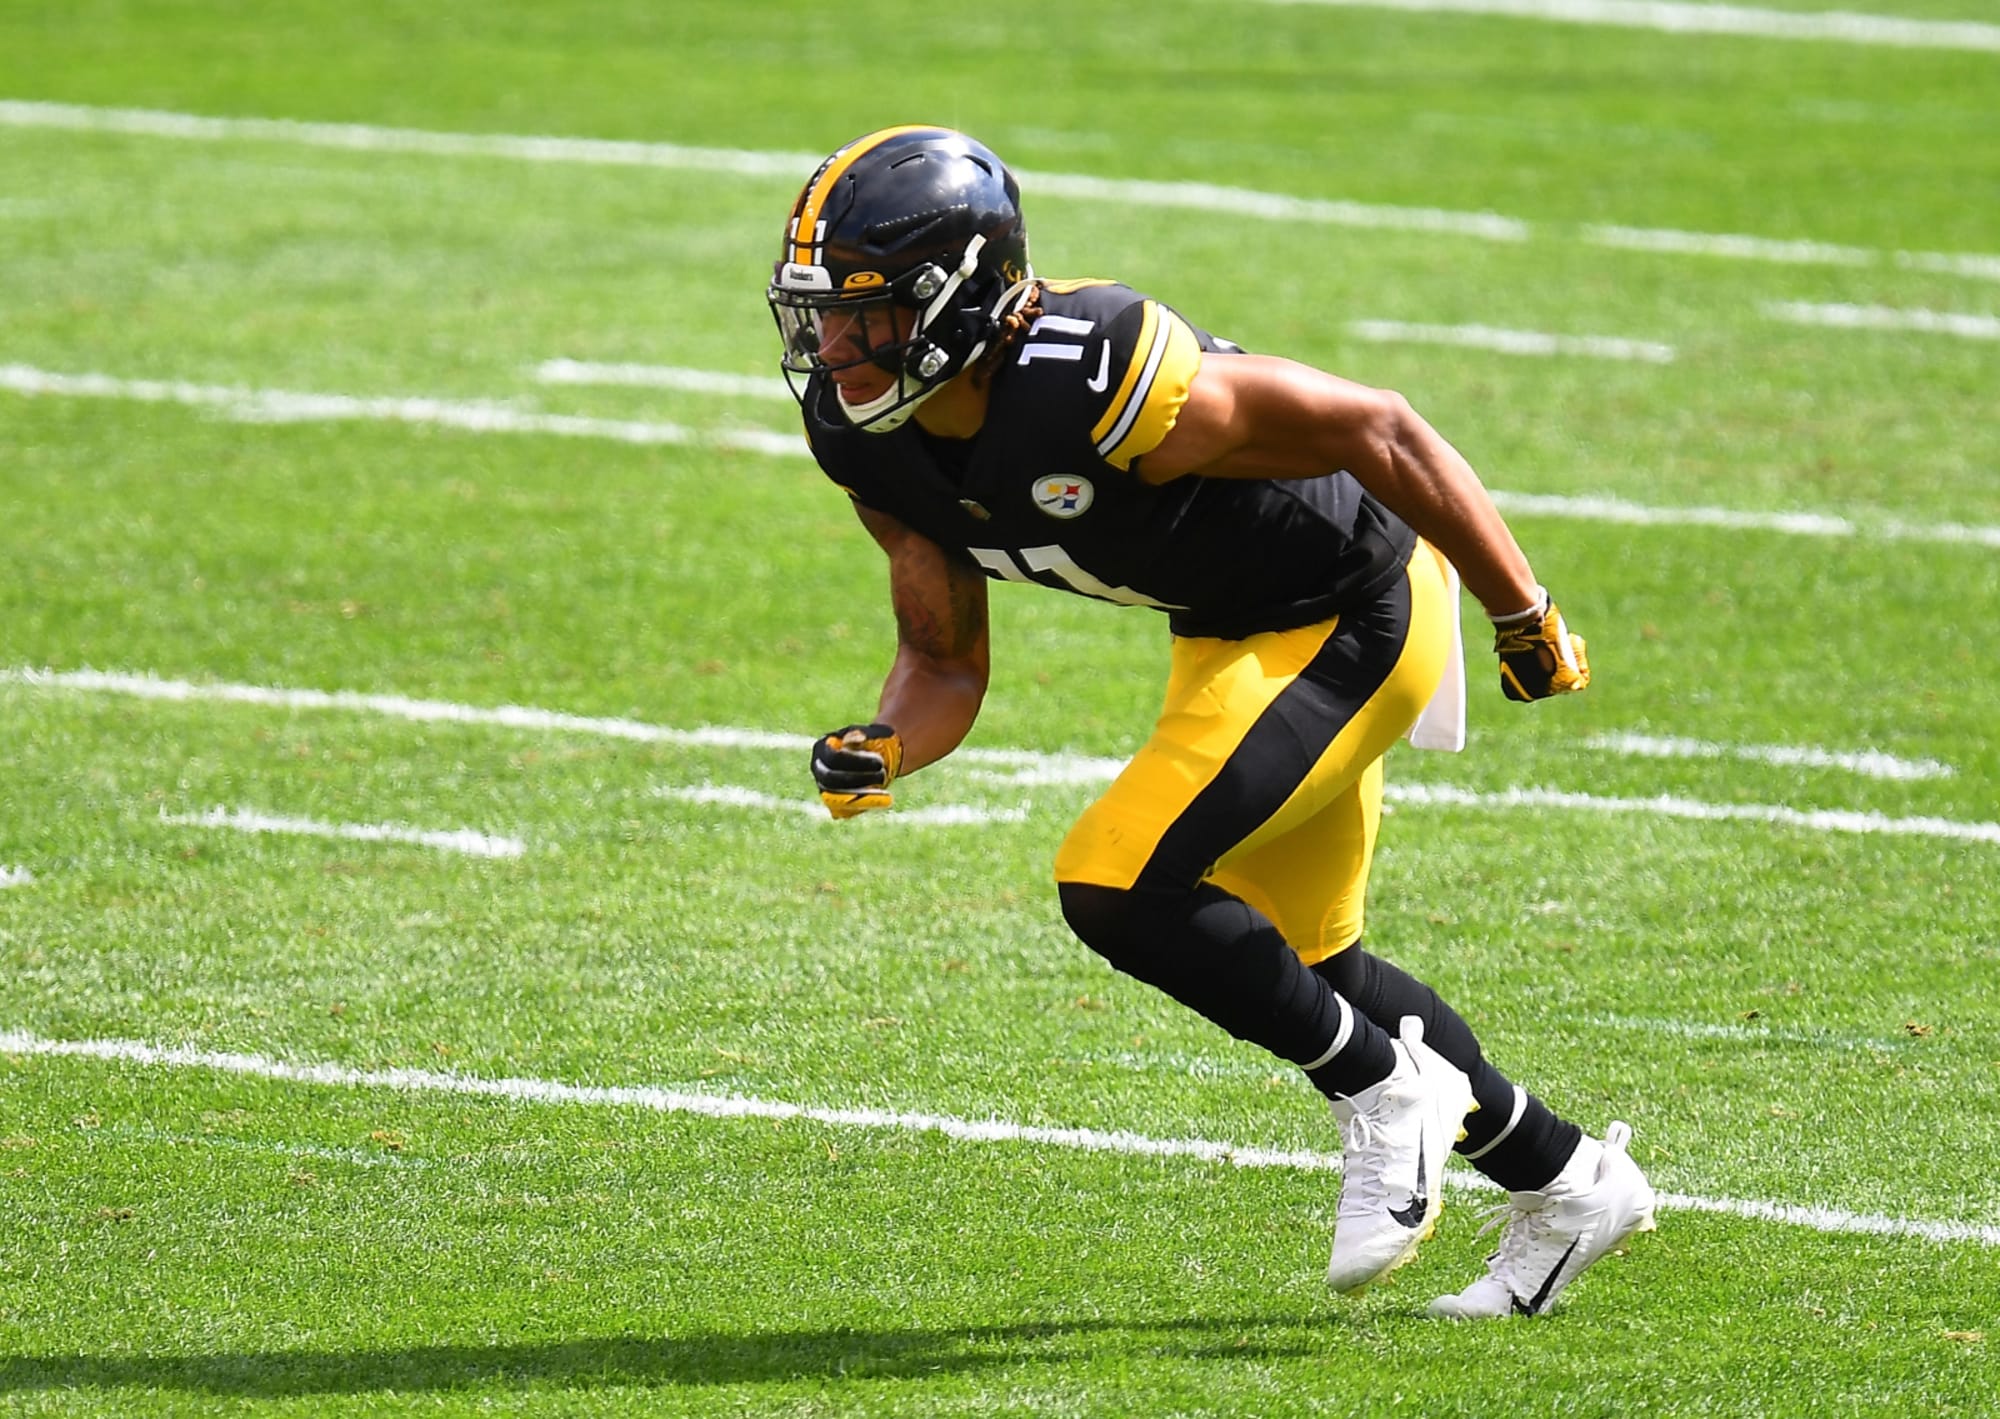 chase pittsburgh steelers